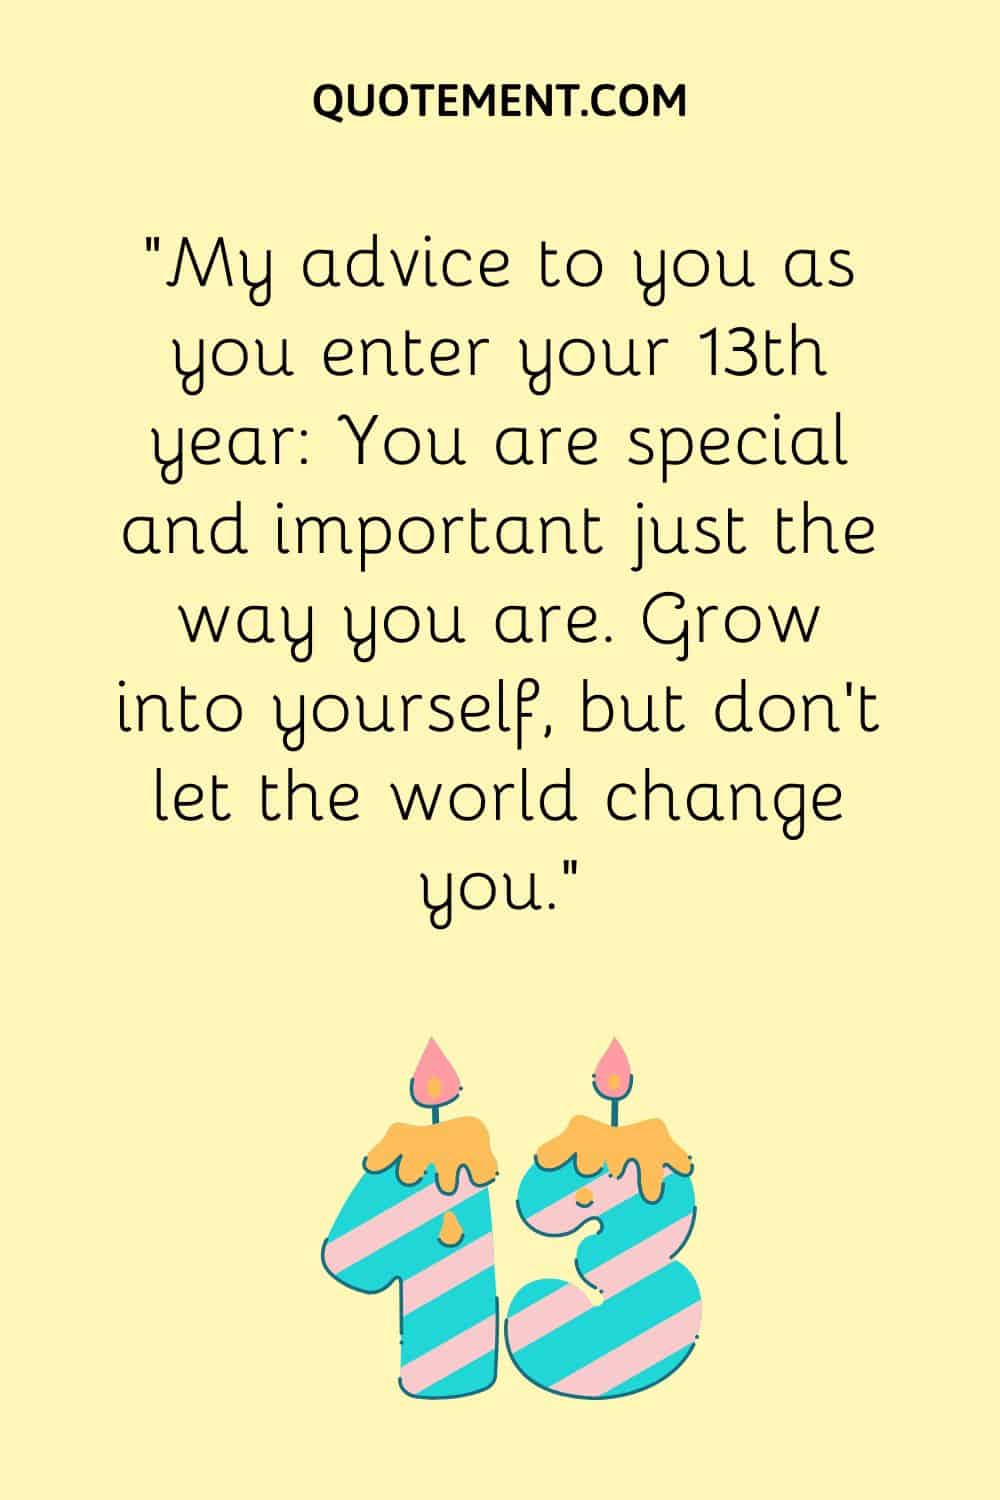 My advice to you as you enter your 13th year You are special and important just the way you are